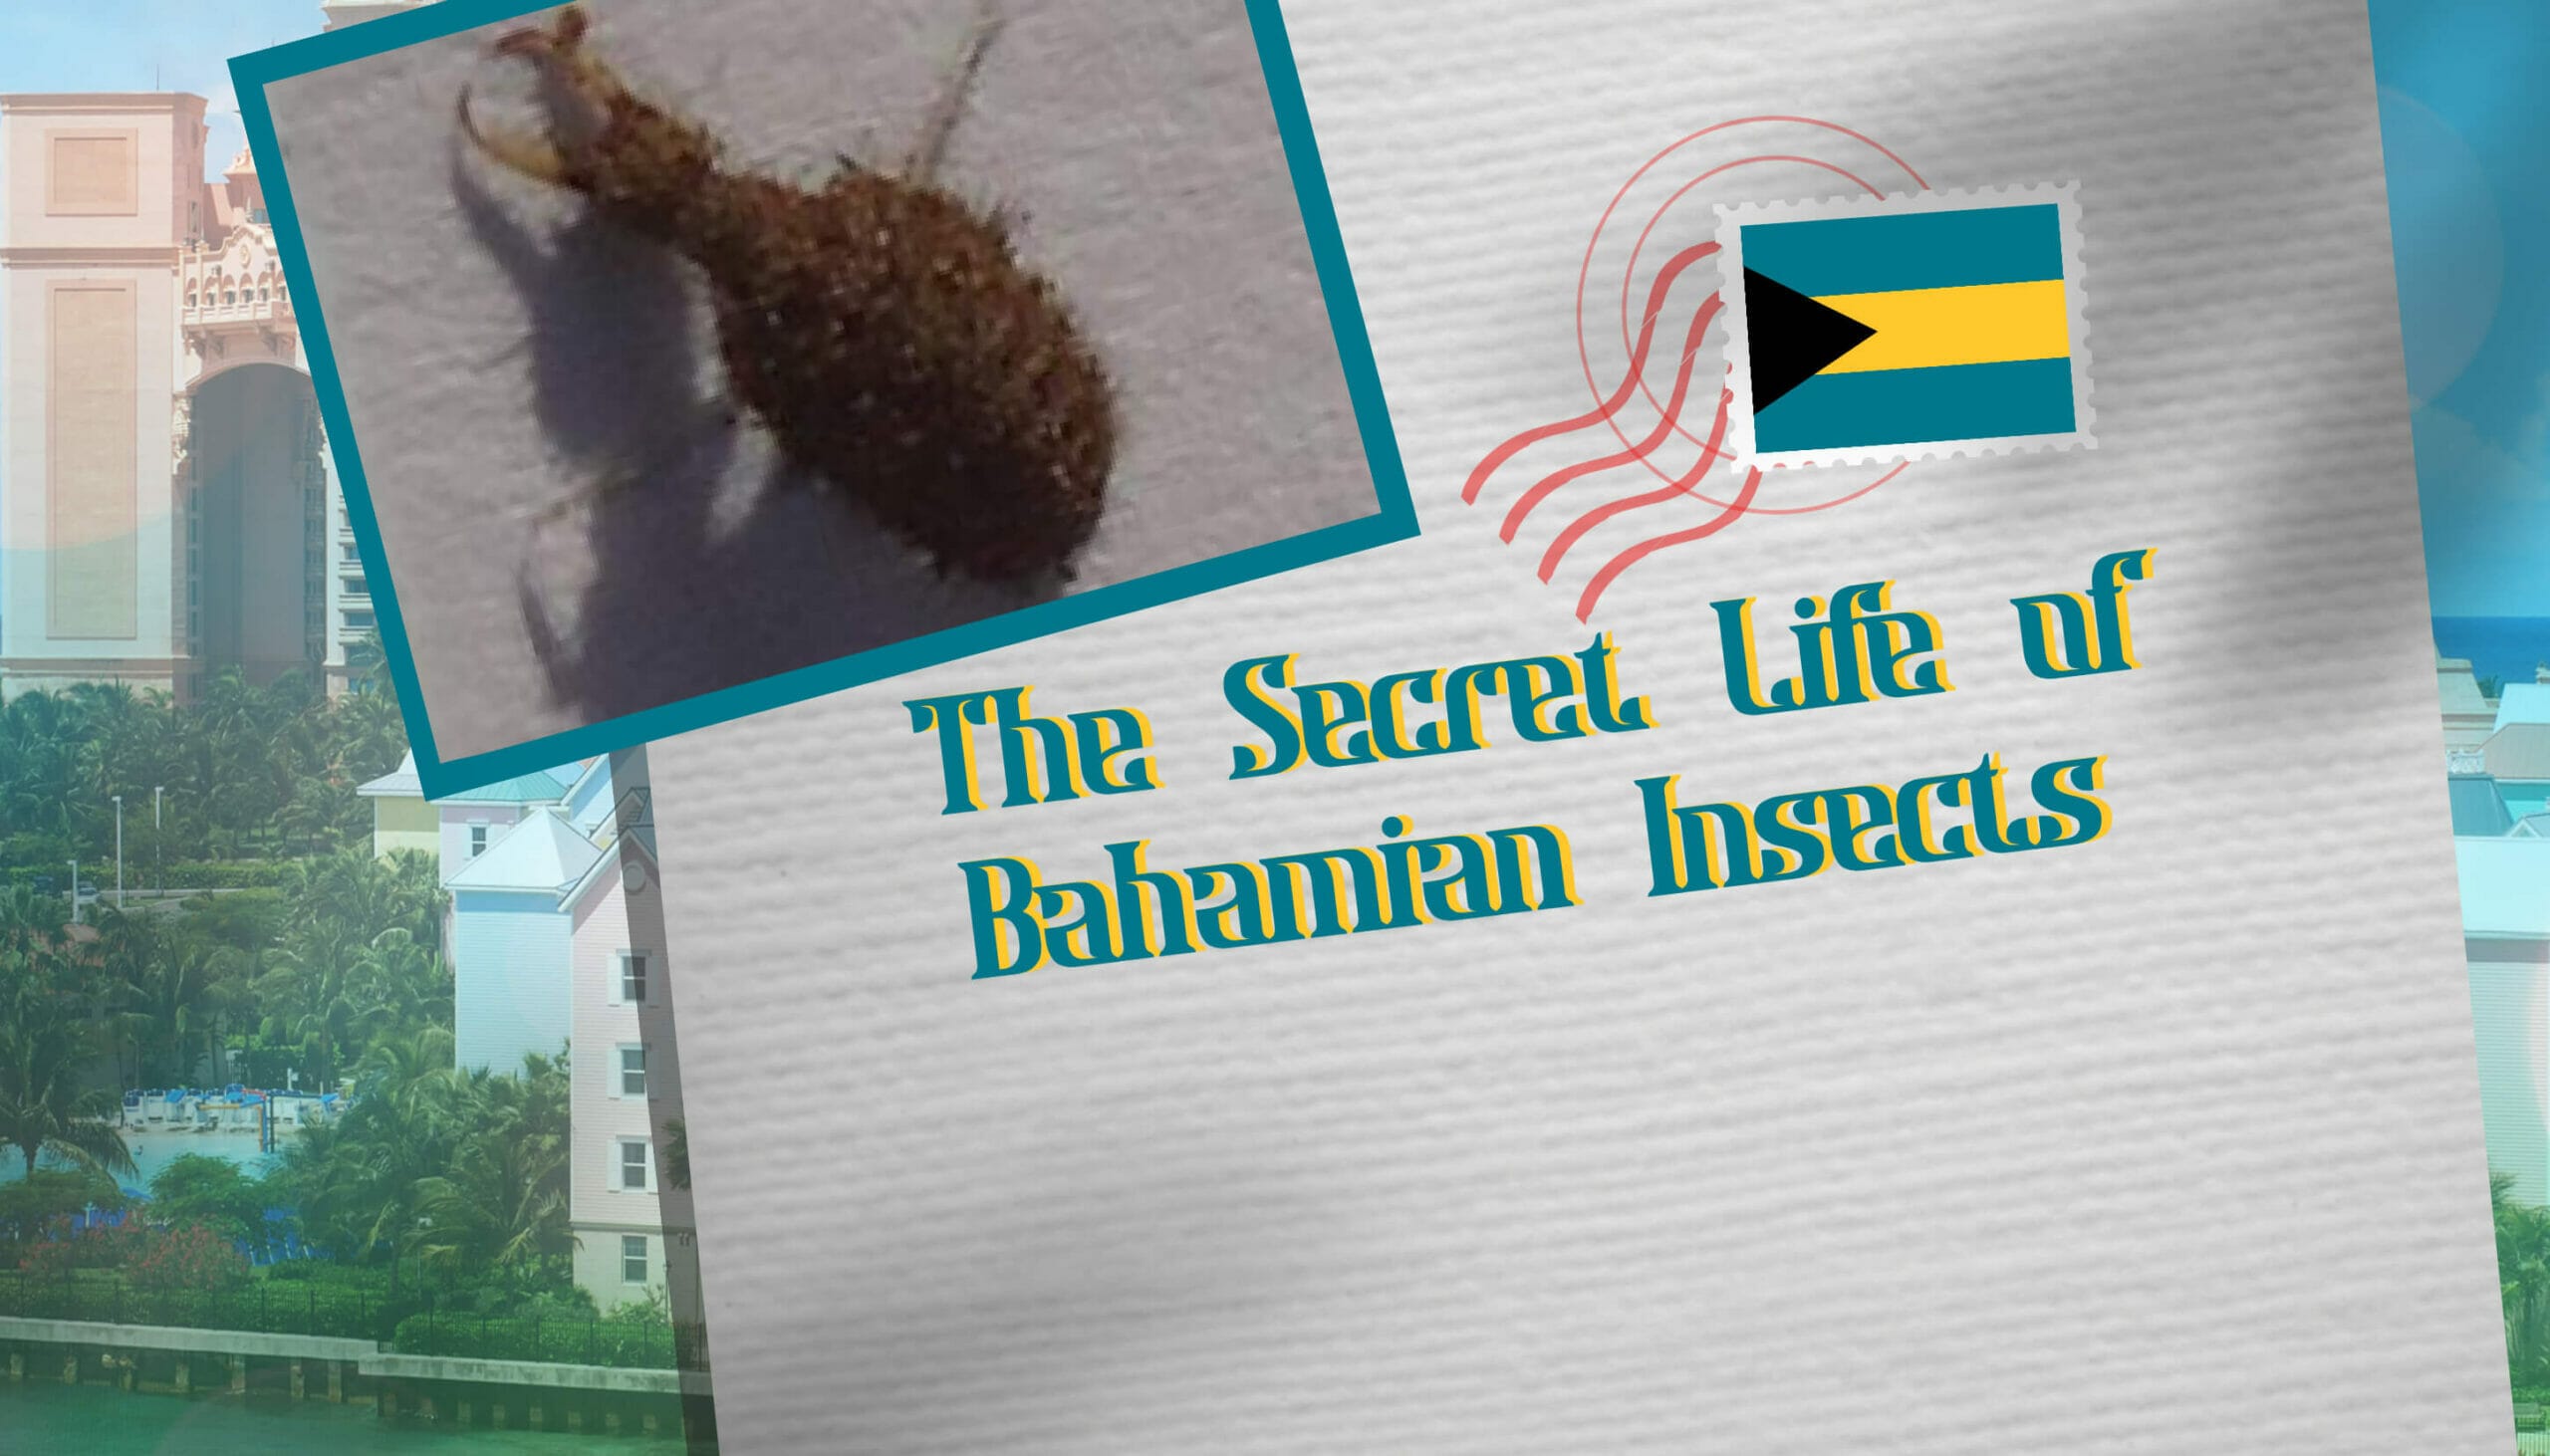 The Secret Life of Bahamian Insects